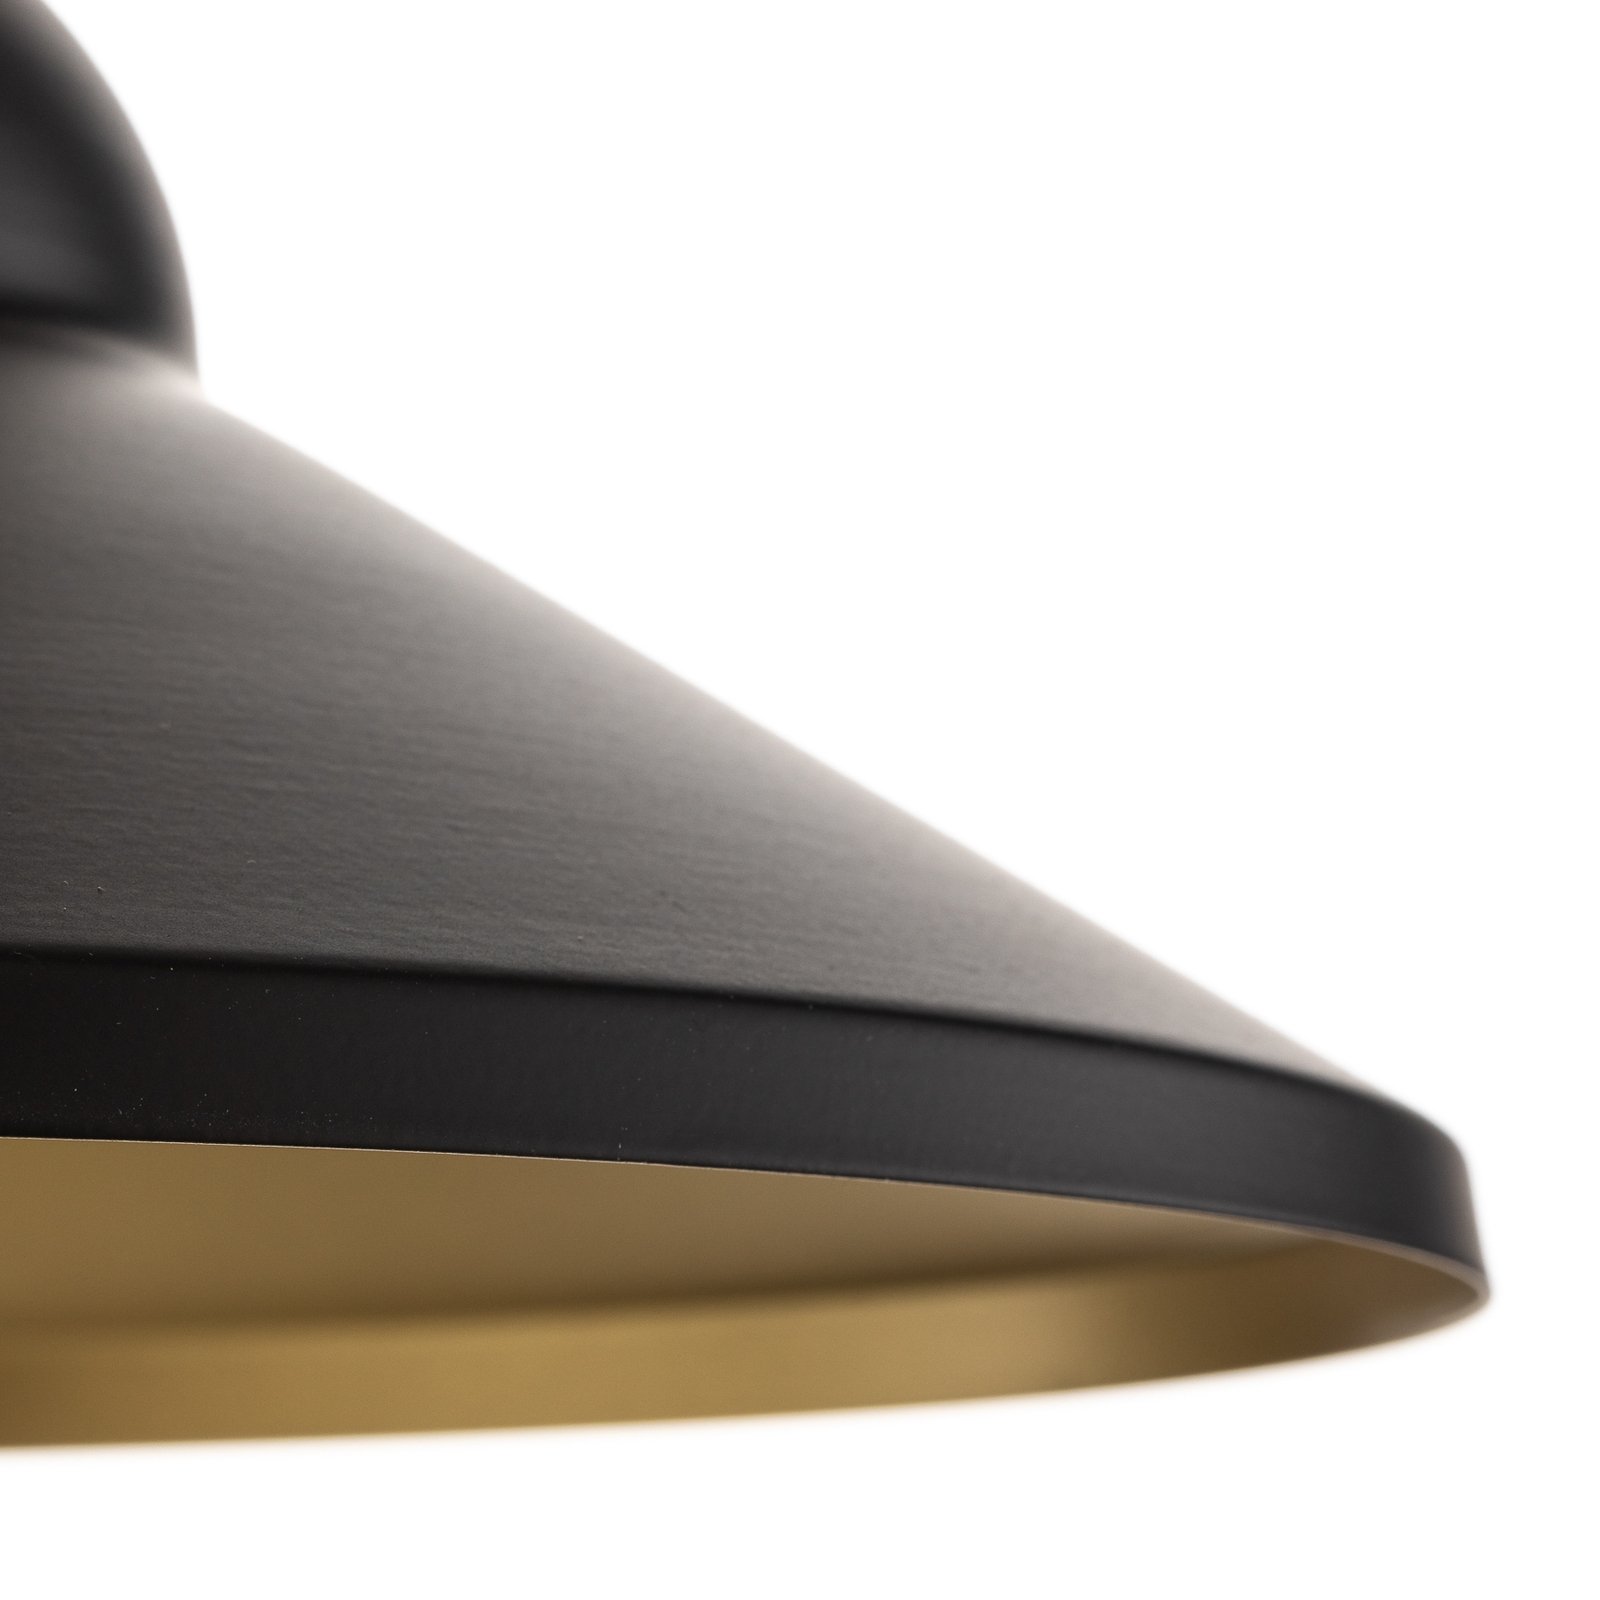 Taft pendant light with lampshade in black and gold